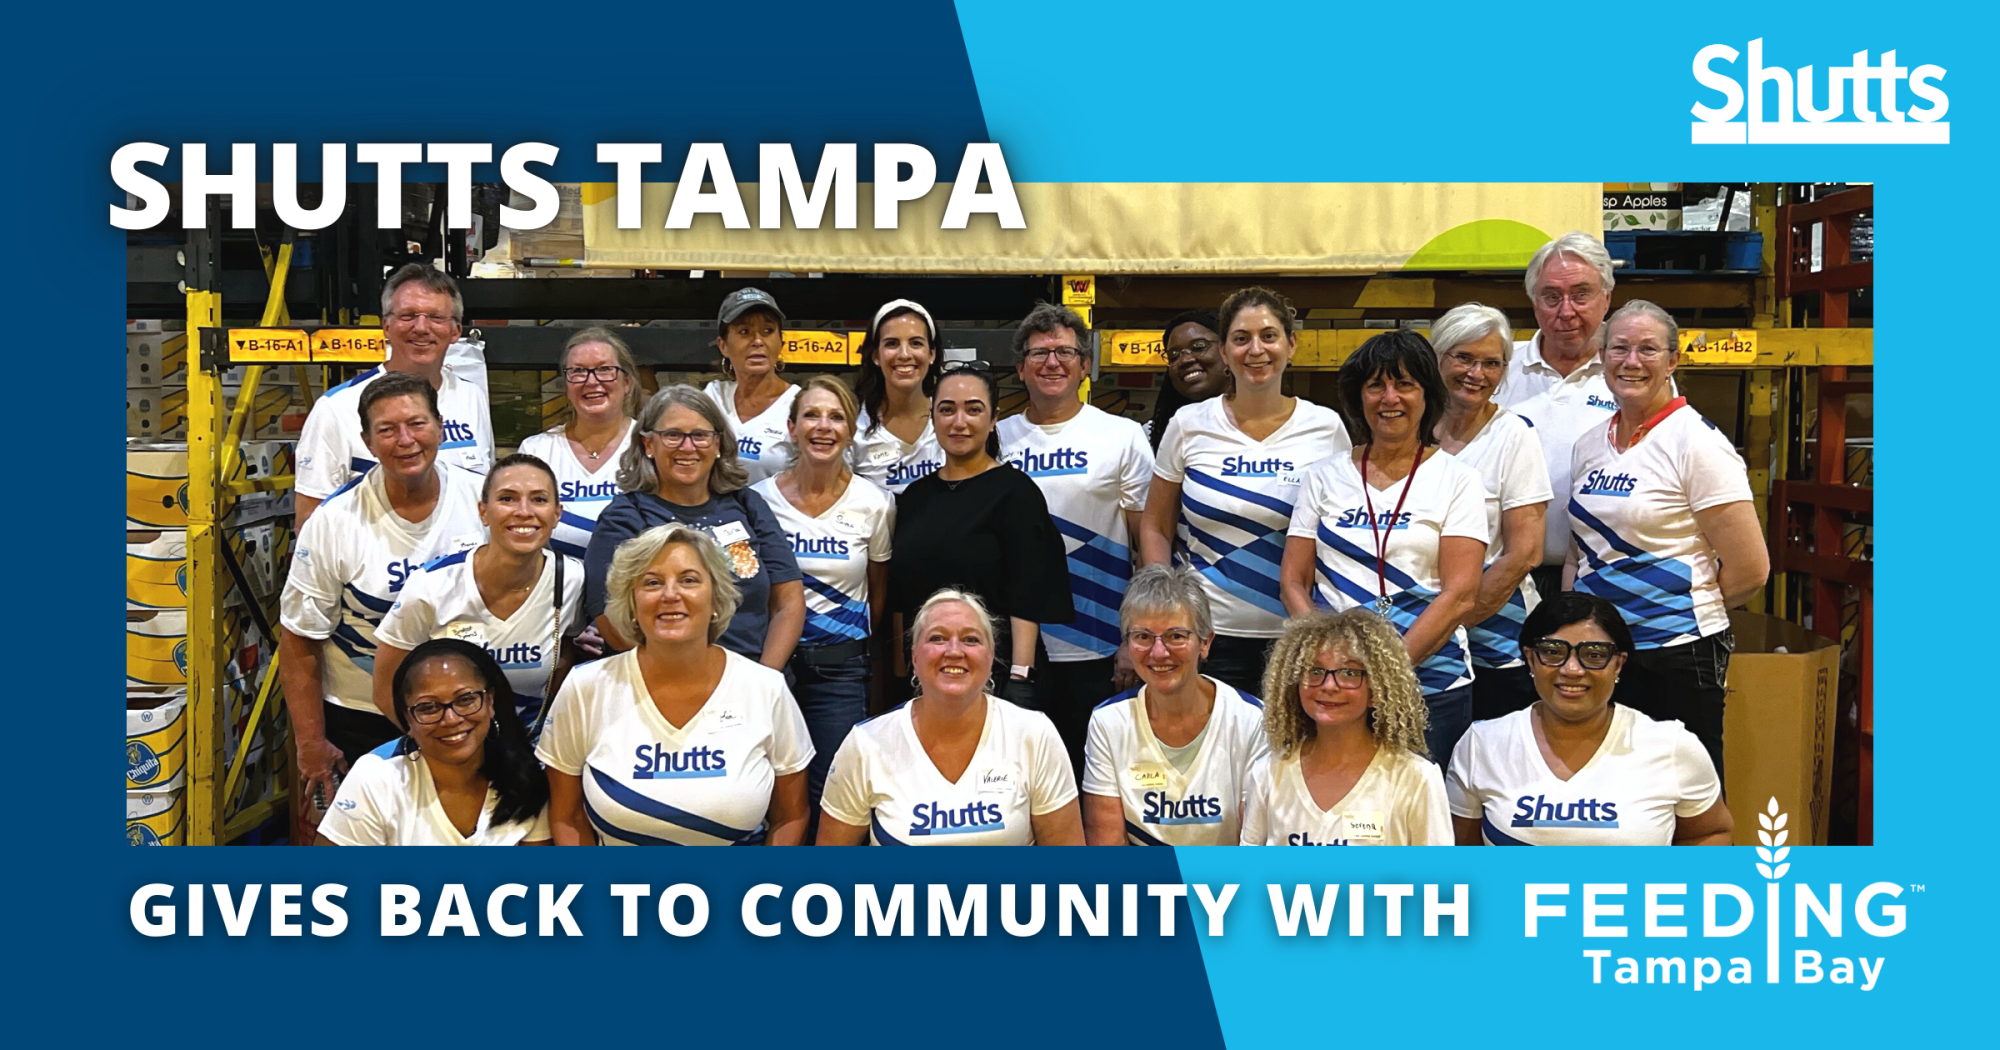 Shutts Tampa Gives Back to Community with Feeding Tampa Bay